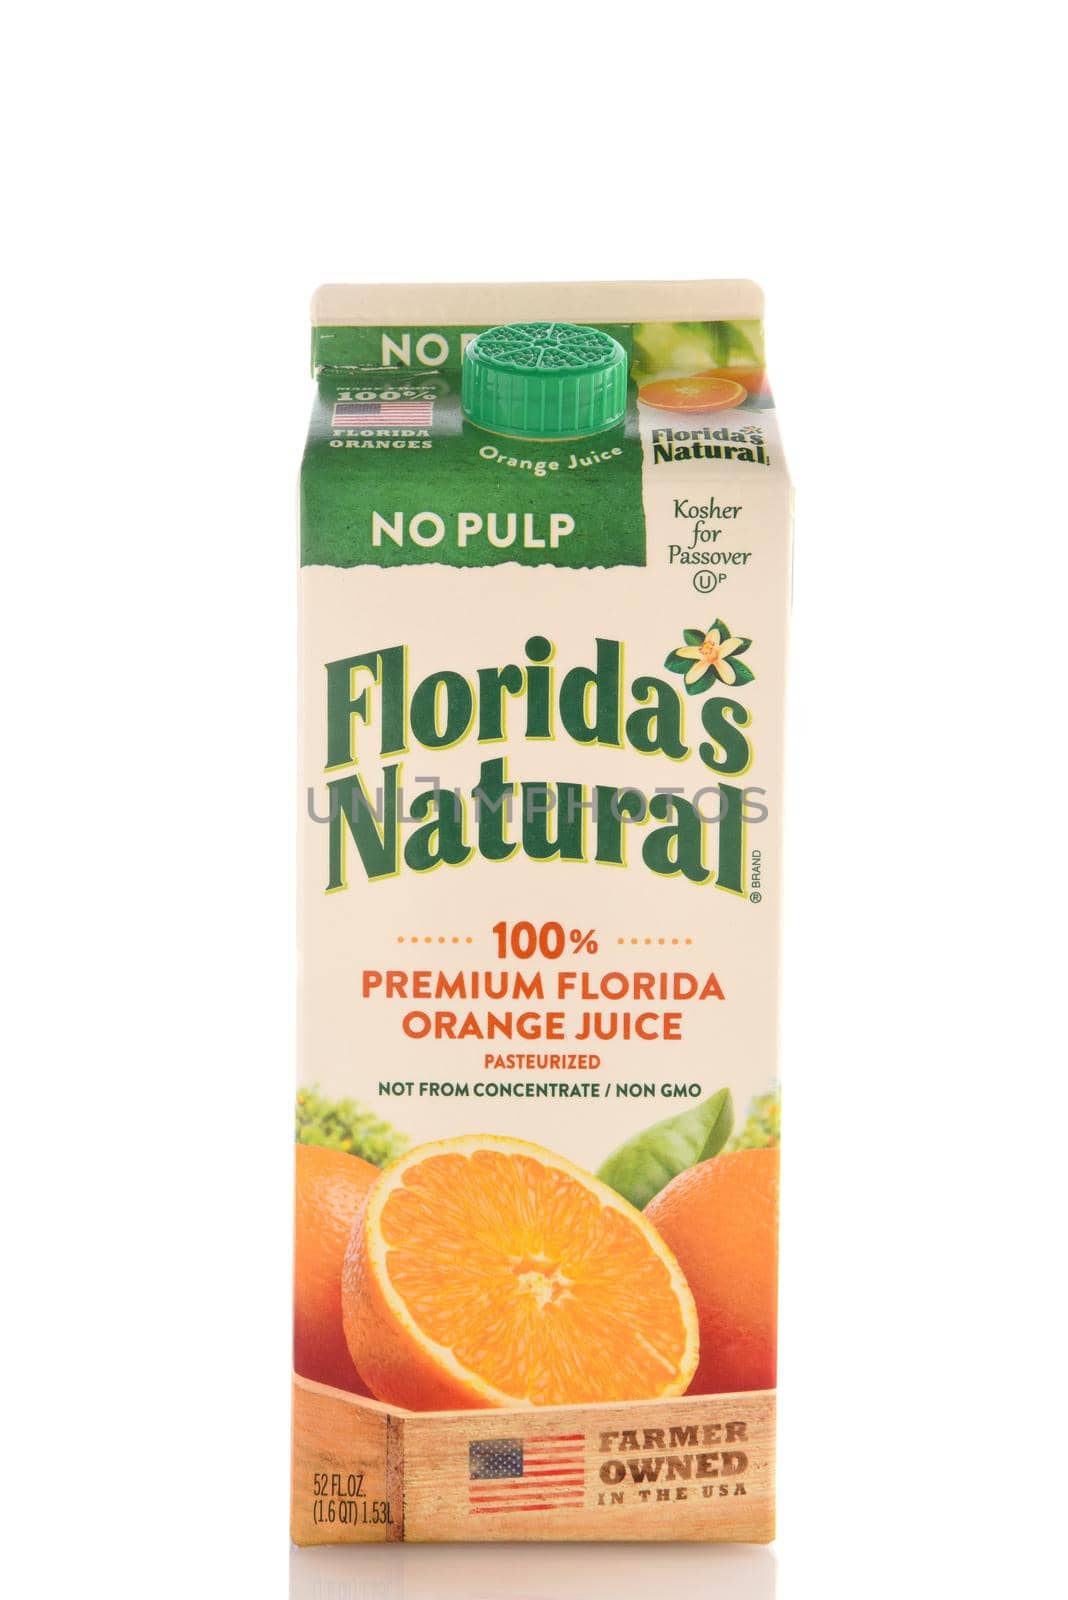 IRVINE, CALIFORNIA - MAY 6, 2019: A 52 ounce container of Floridas Natural Premium Florida Orange Juice with No Pulp.